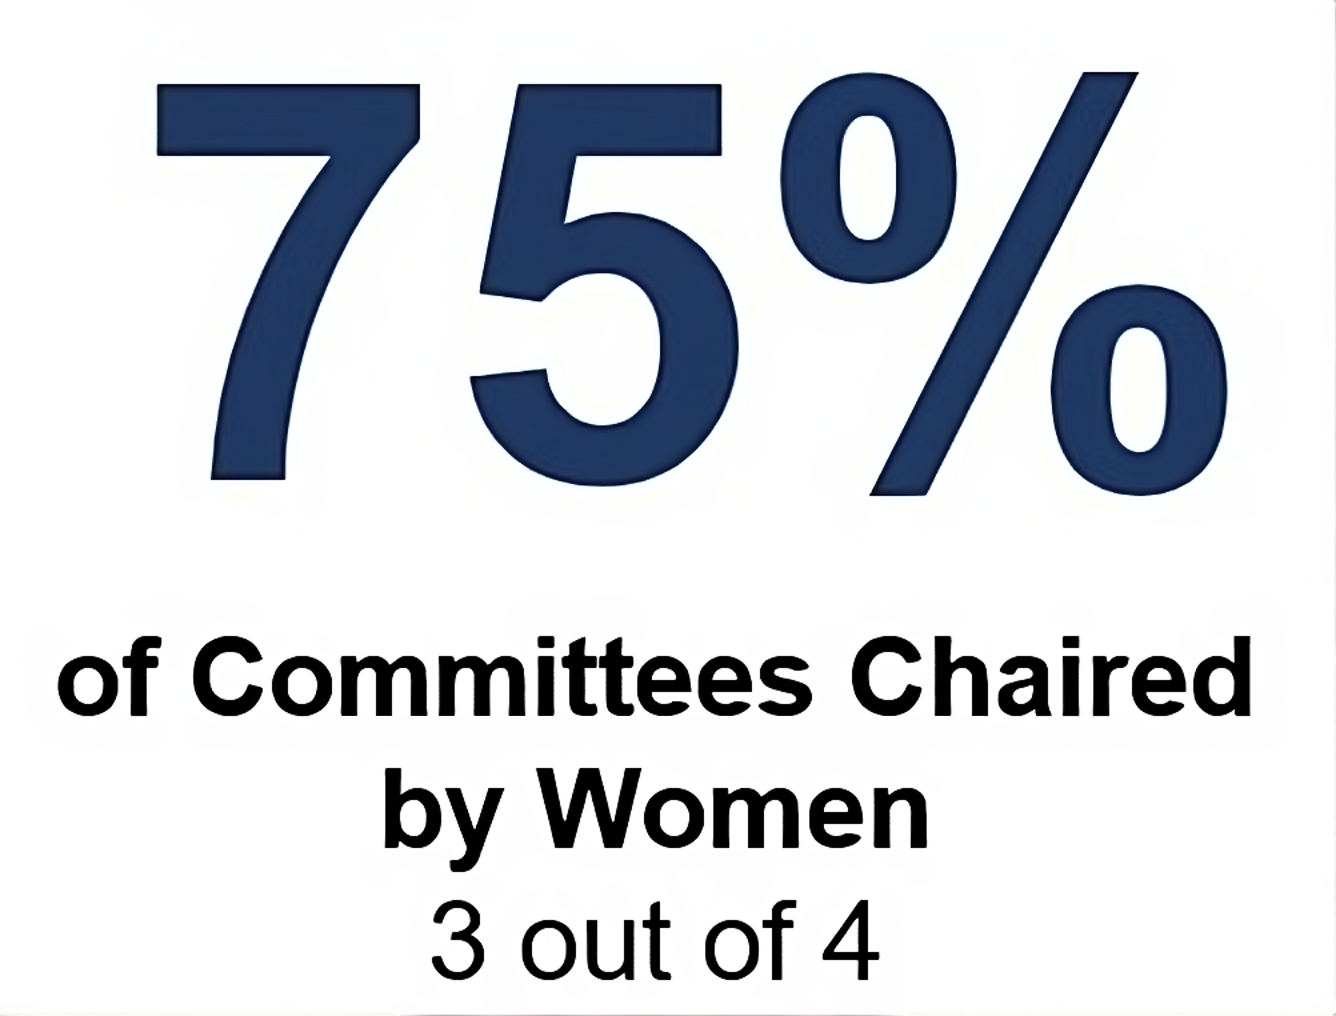 Proxy_Summary_-_Committees_Chaired_by_Women.jpg